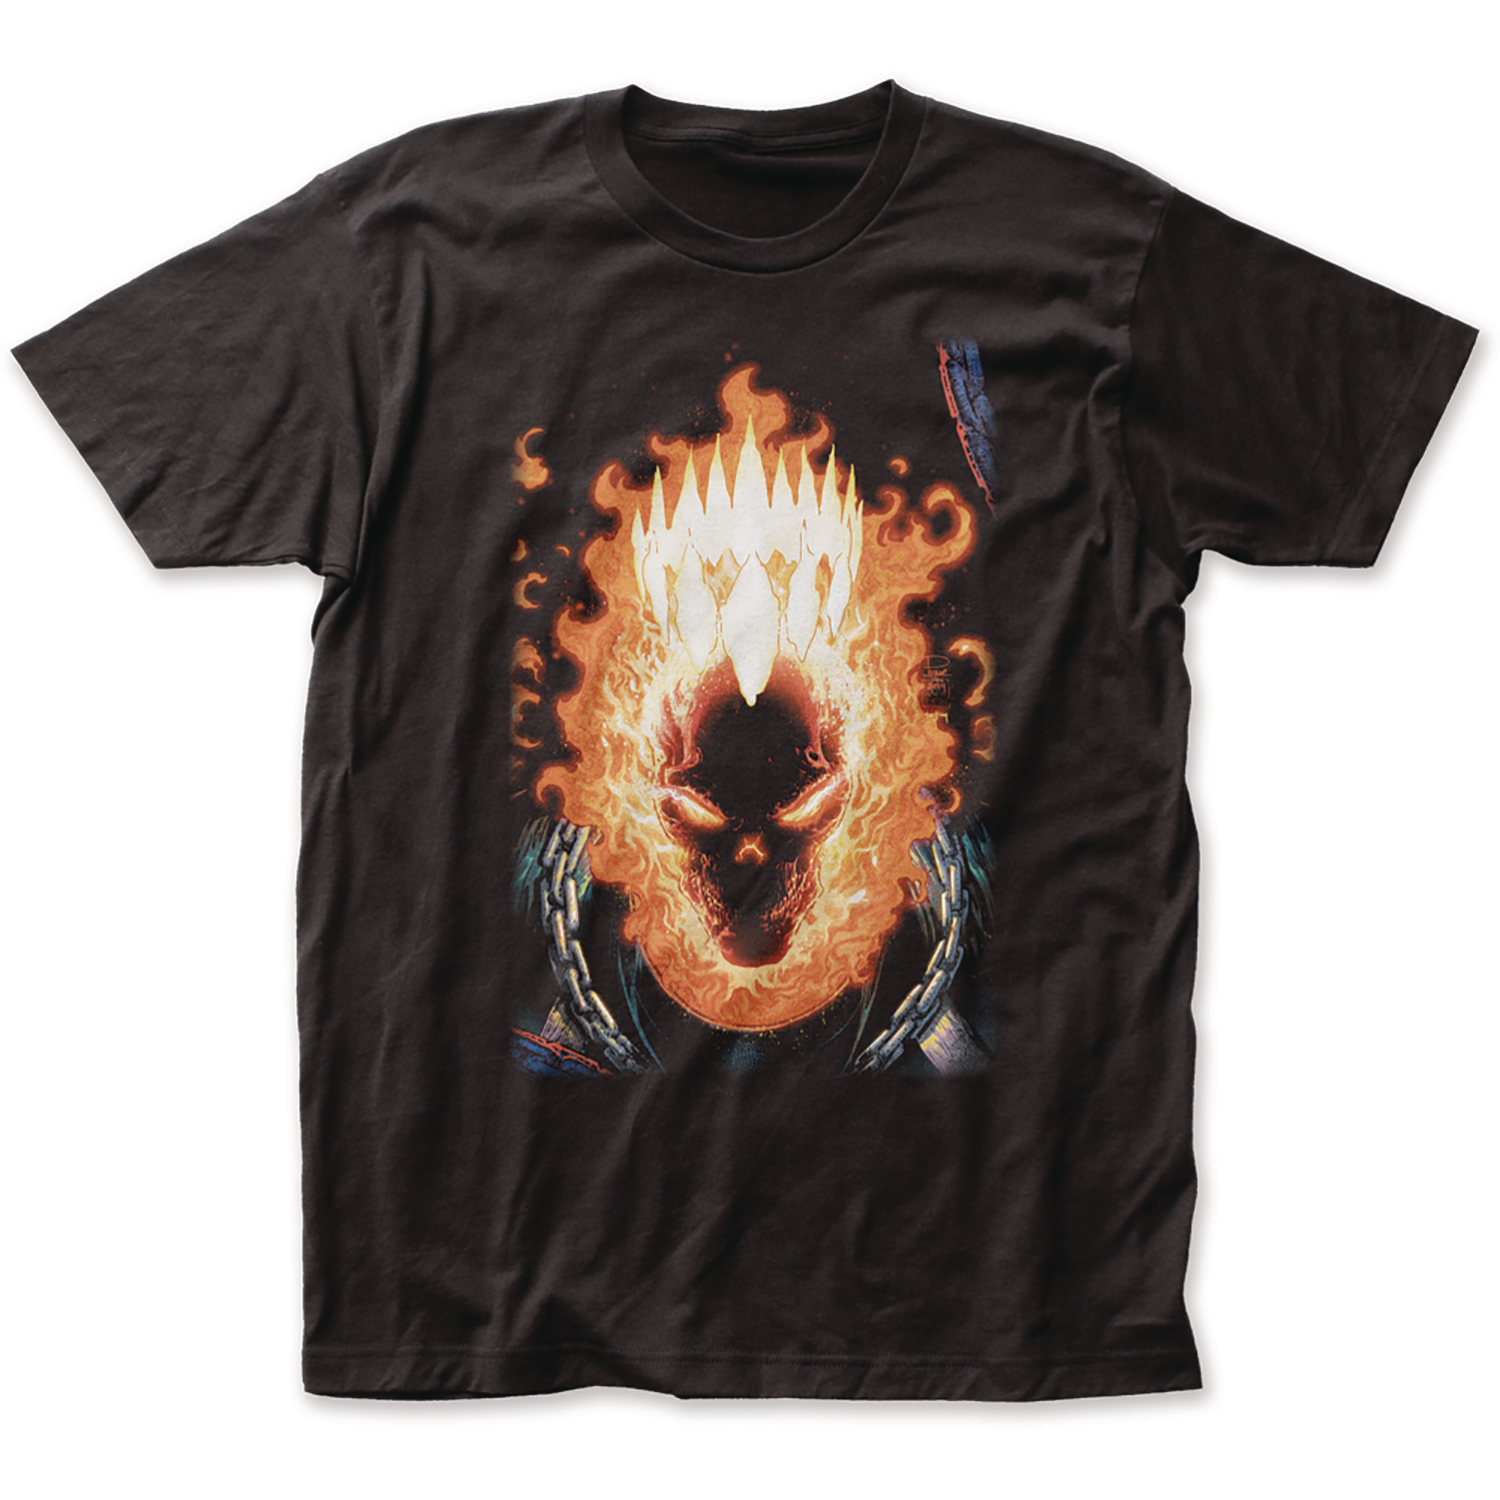 Marvel Ghost Rider Crown Px T-Shirt Large